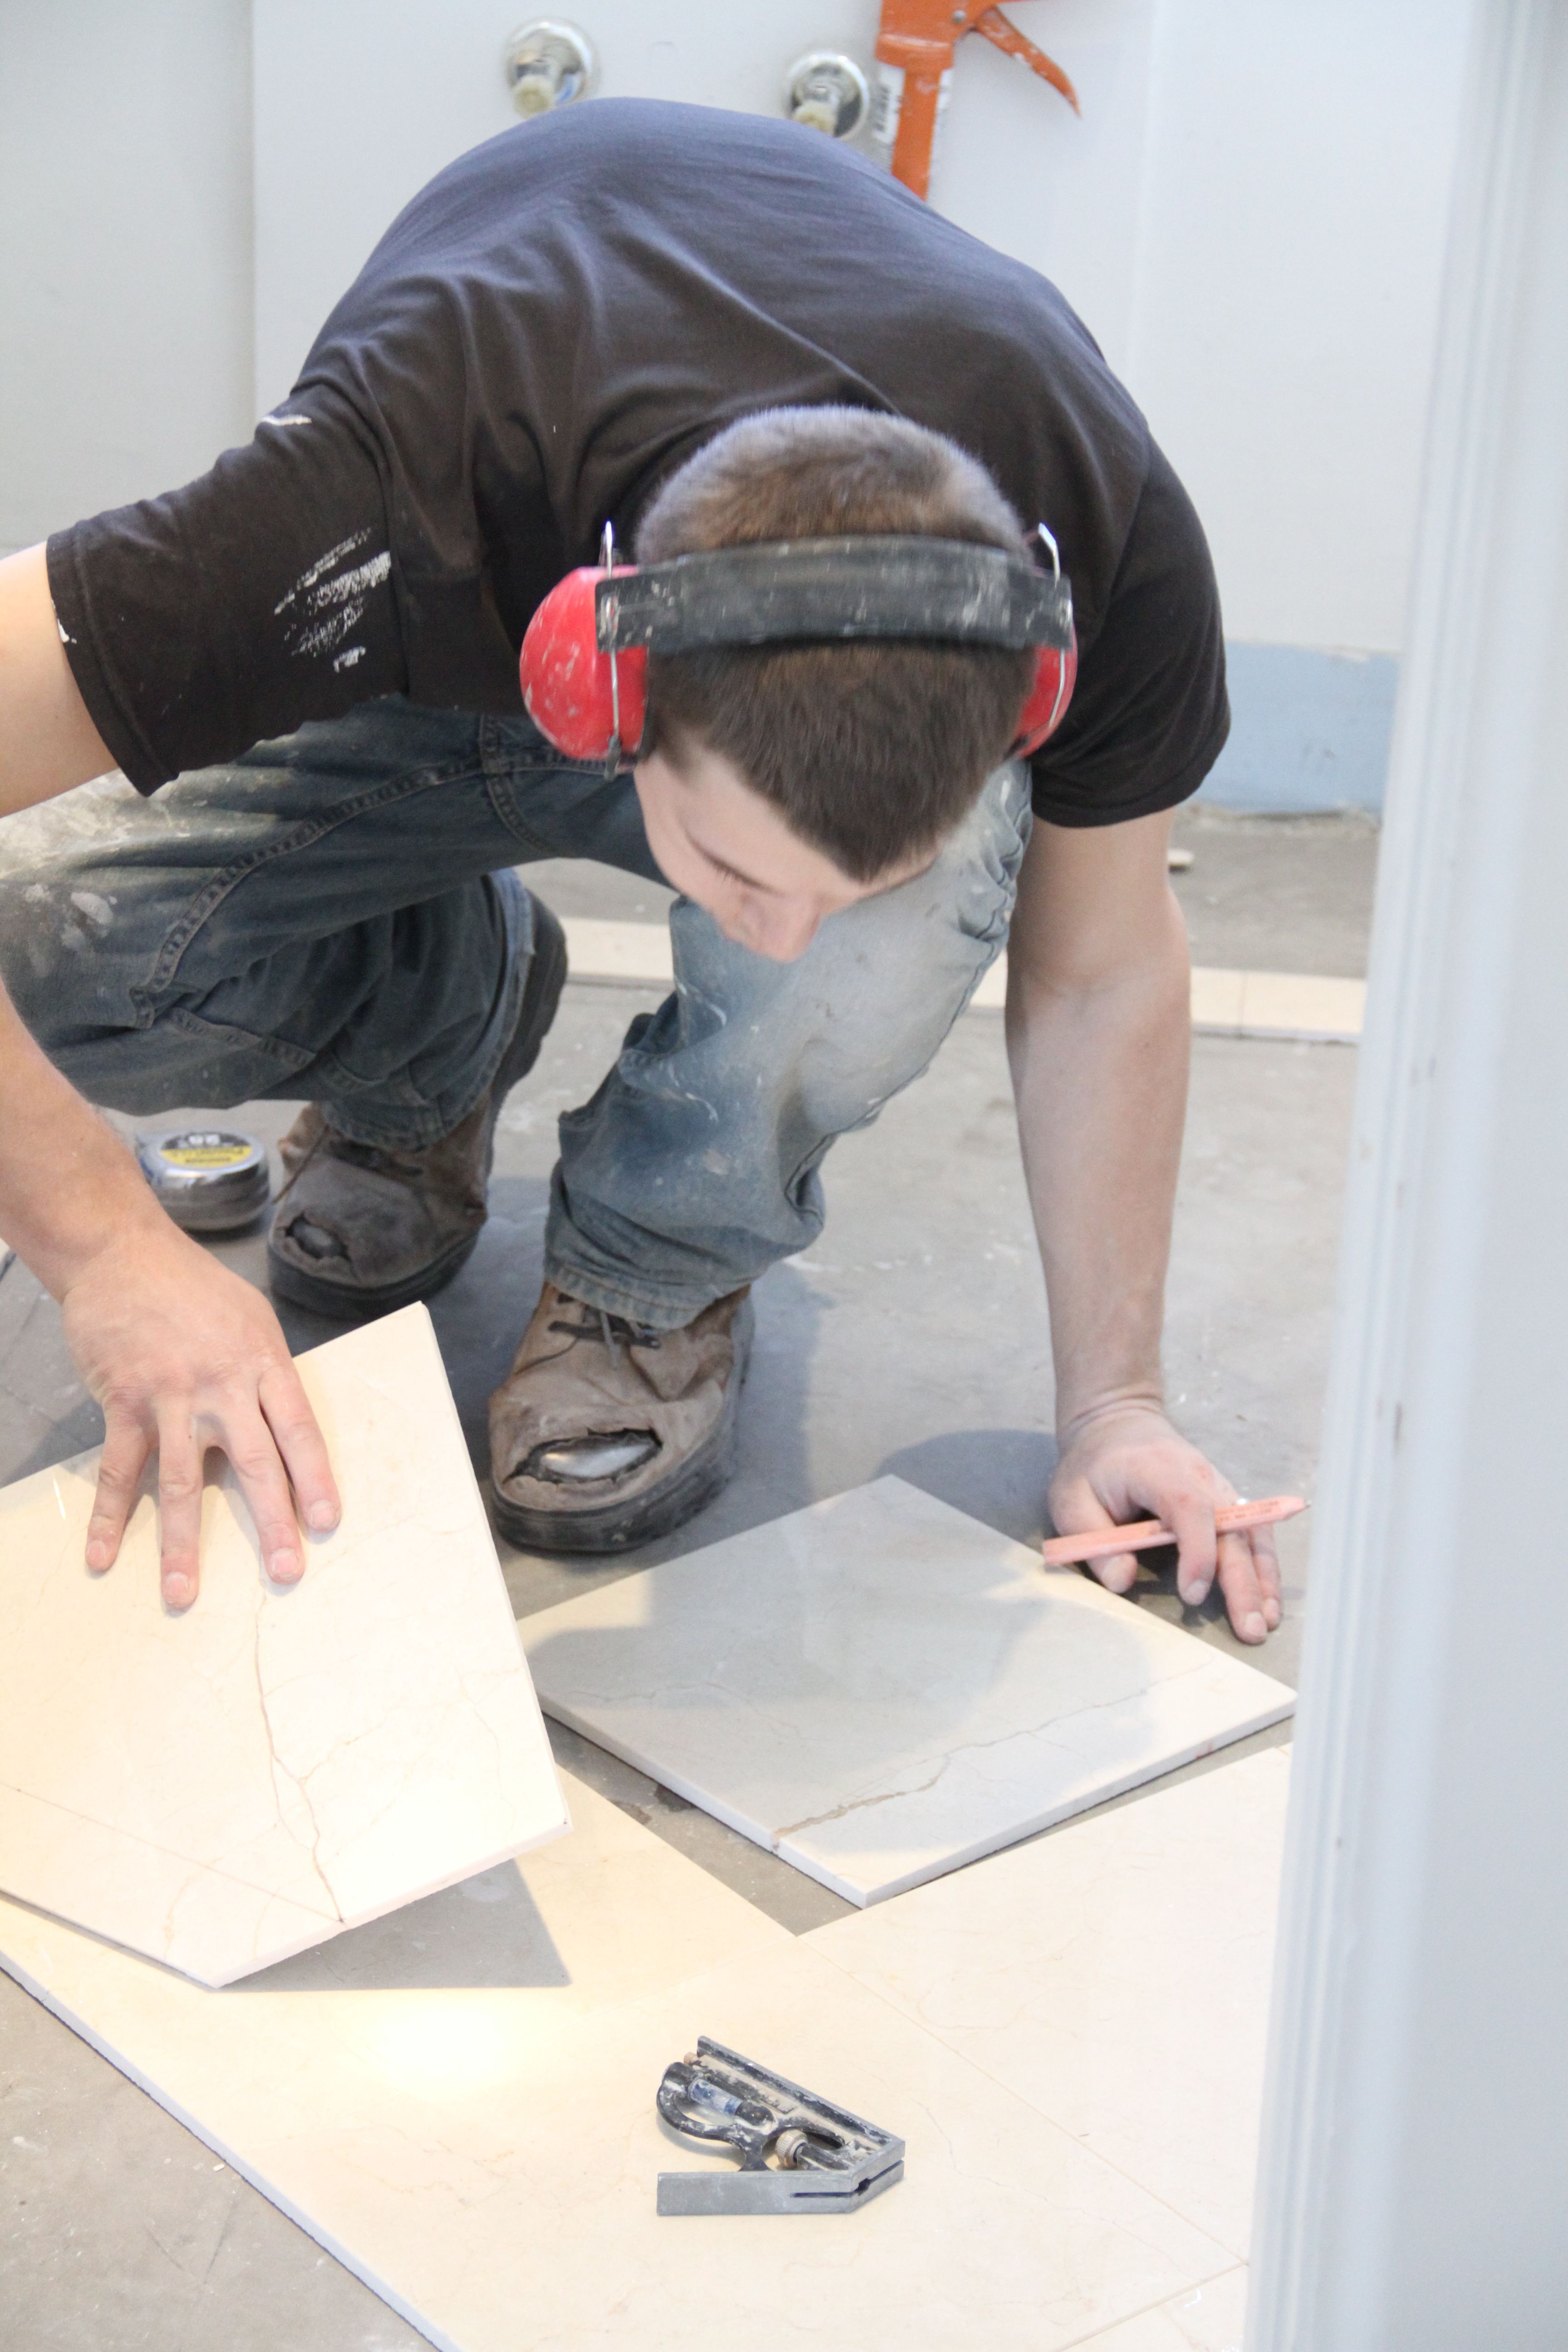 J.J. began by dry-fitting/cutting the entire floor - a painstaking process that required meticulous attention to detail.